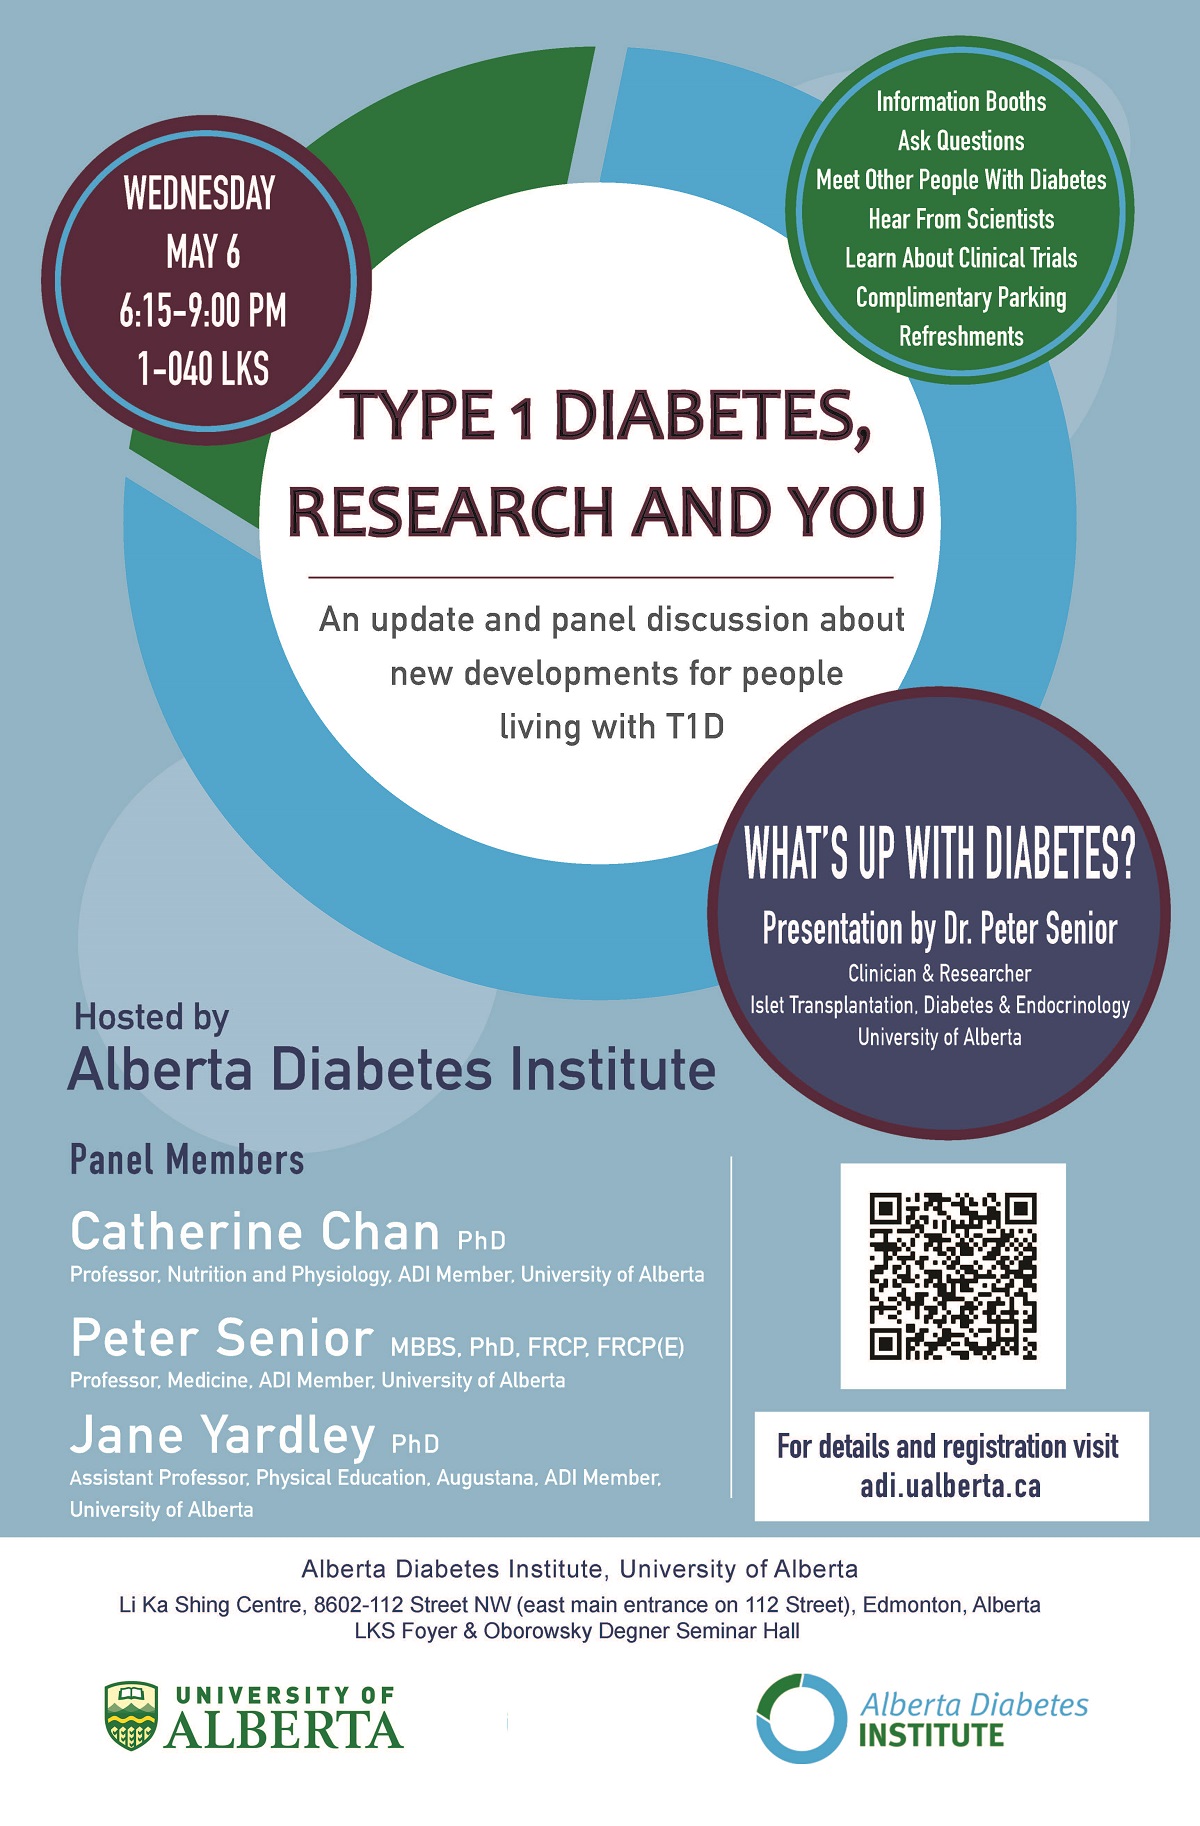 research being done for type 1 diabetes